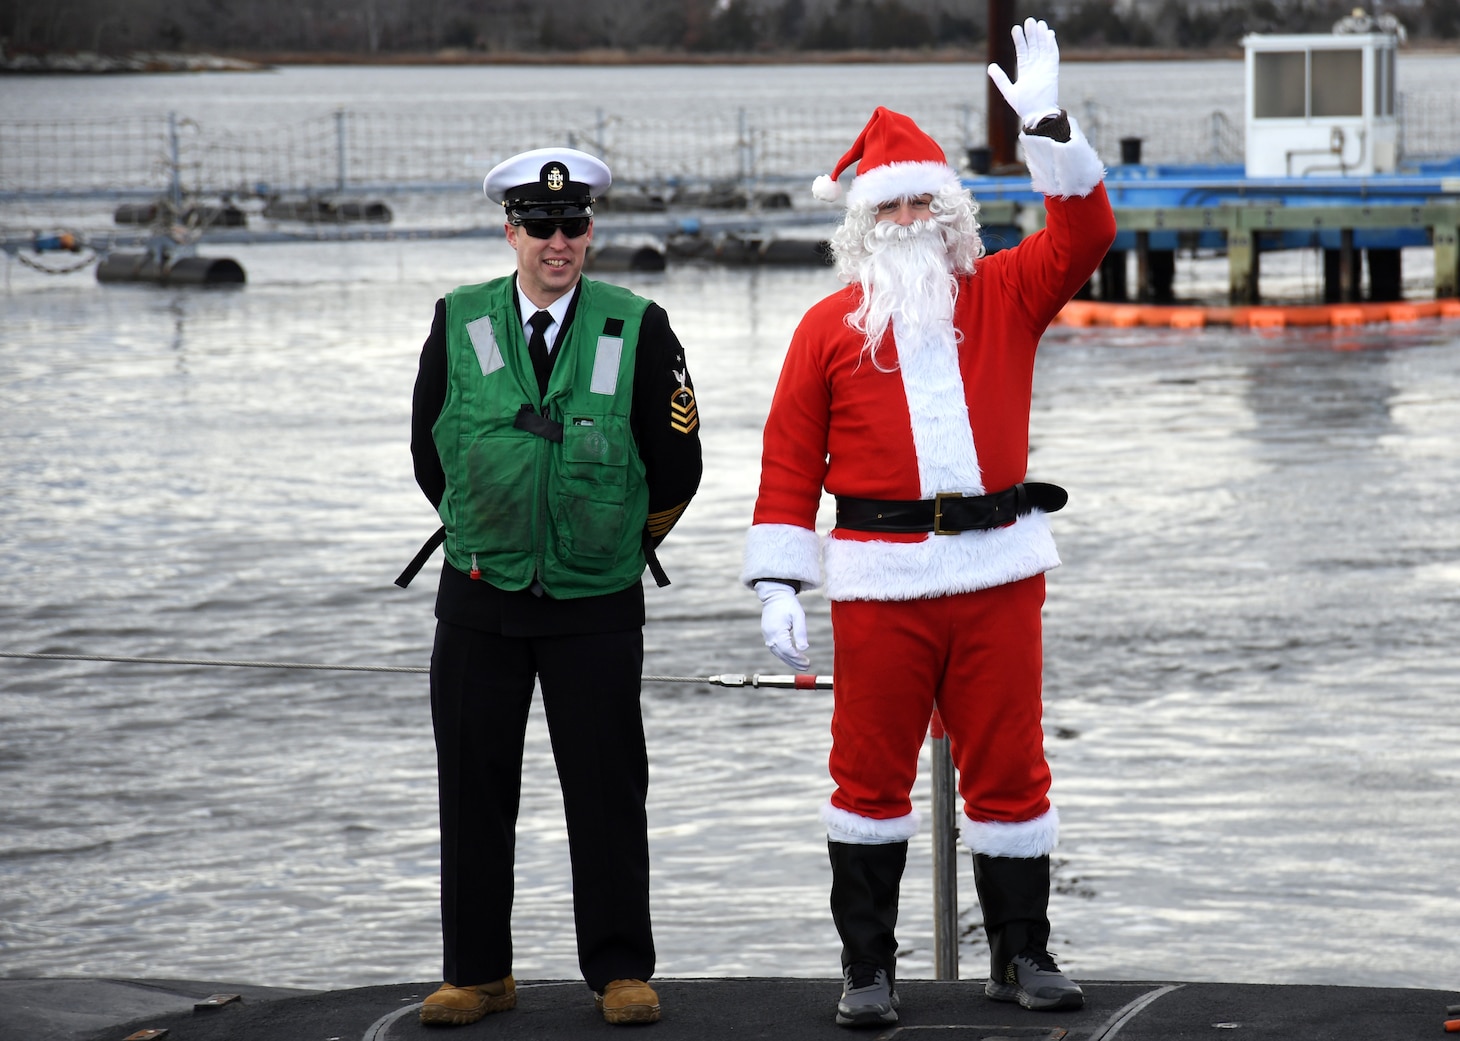 Santa Claus waves onboard the USS South Dakota (SSN 790) during a homecoming event at Naval Submarine Base New London in Groton, Conn., Dec. 18. South Dakota returned to homeport after a five-month deployment in support of the chief of naval operations’ maritime strategy. The Virginia-class fast-attack submarine USS South Dakota and crew operate under Submarine Squadron (SUBRON) FOUR and its primary mission is to provide attack submarines that are ready, willing, and able to meet the unique challenges of undersea combat and deployed operations in unforgiving environments across the globe.